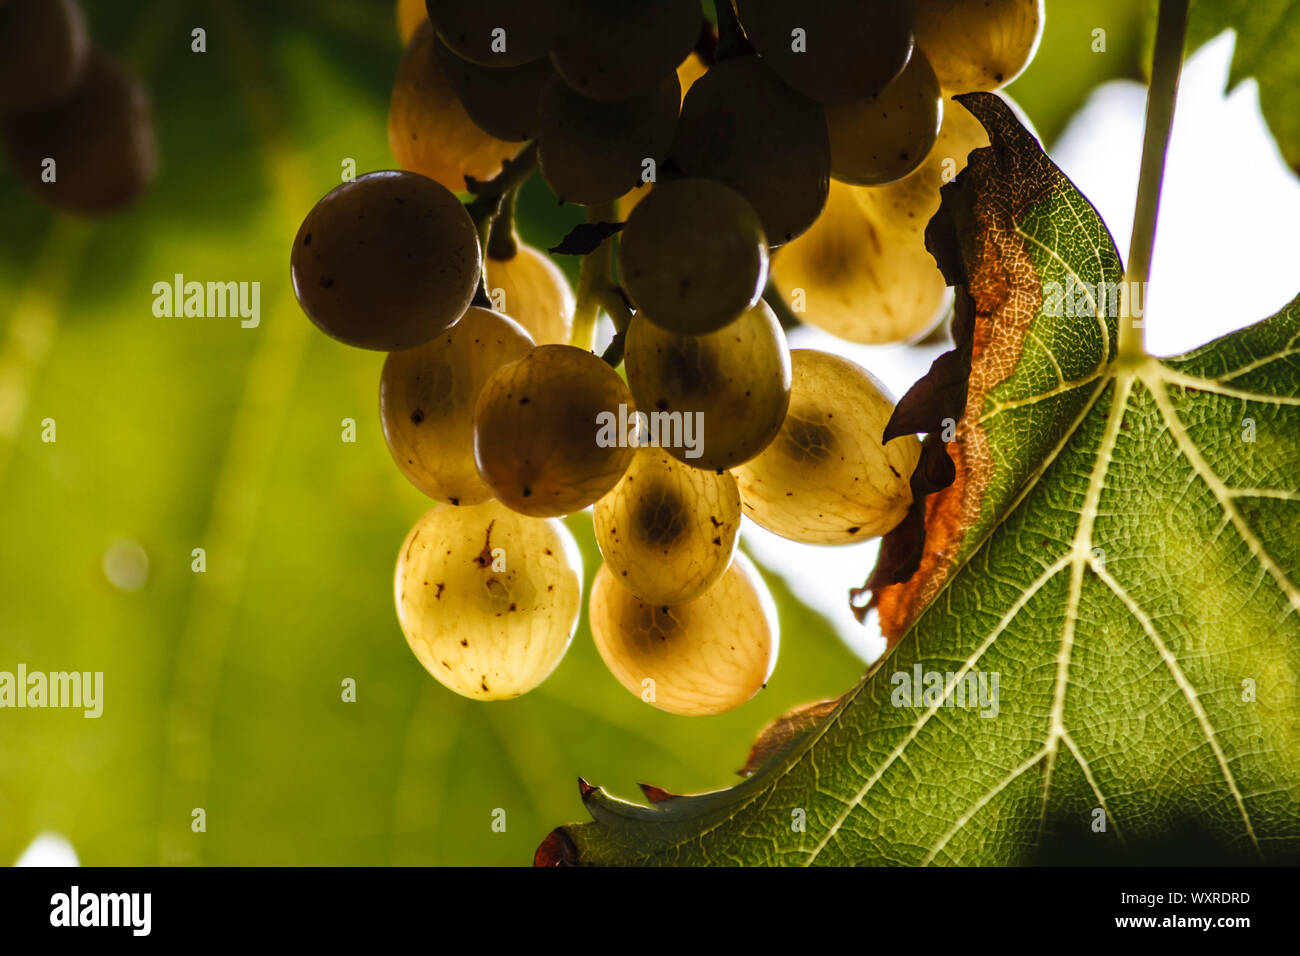 sunlit grapes with leaves in the background Stock Photo